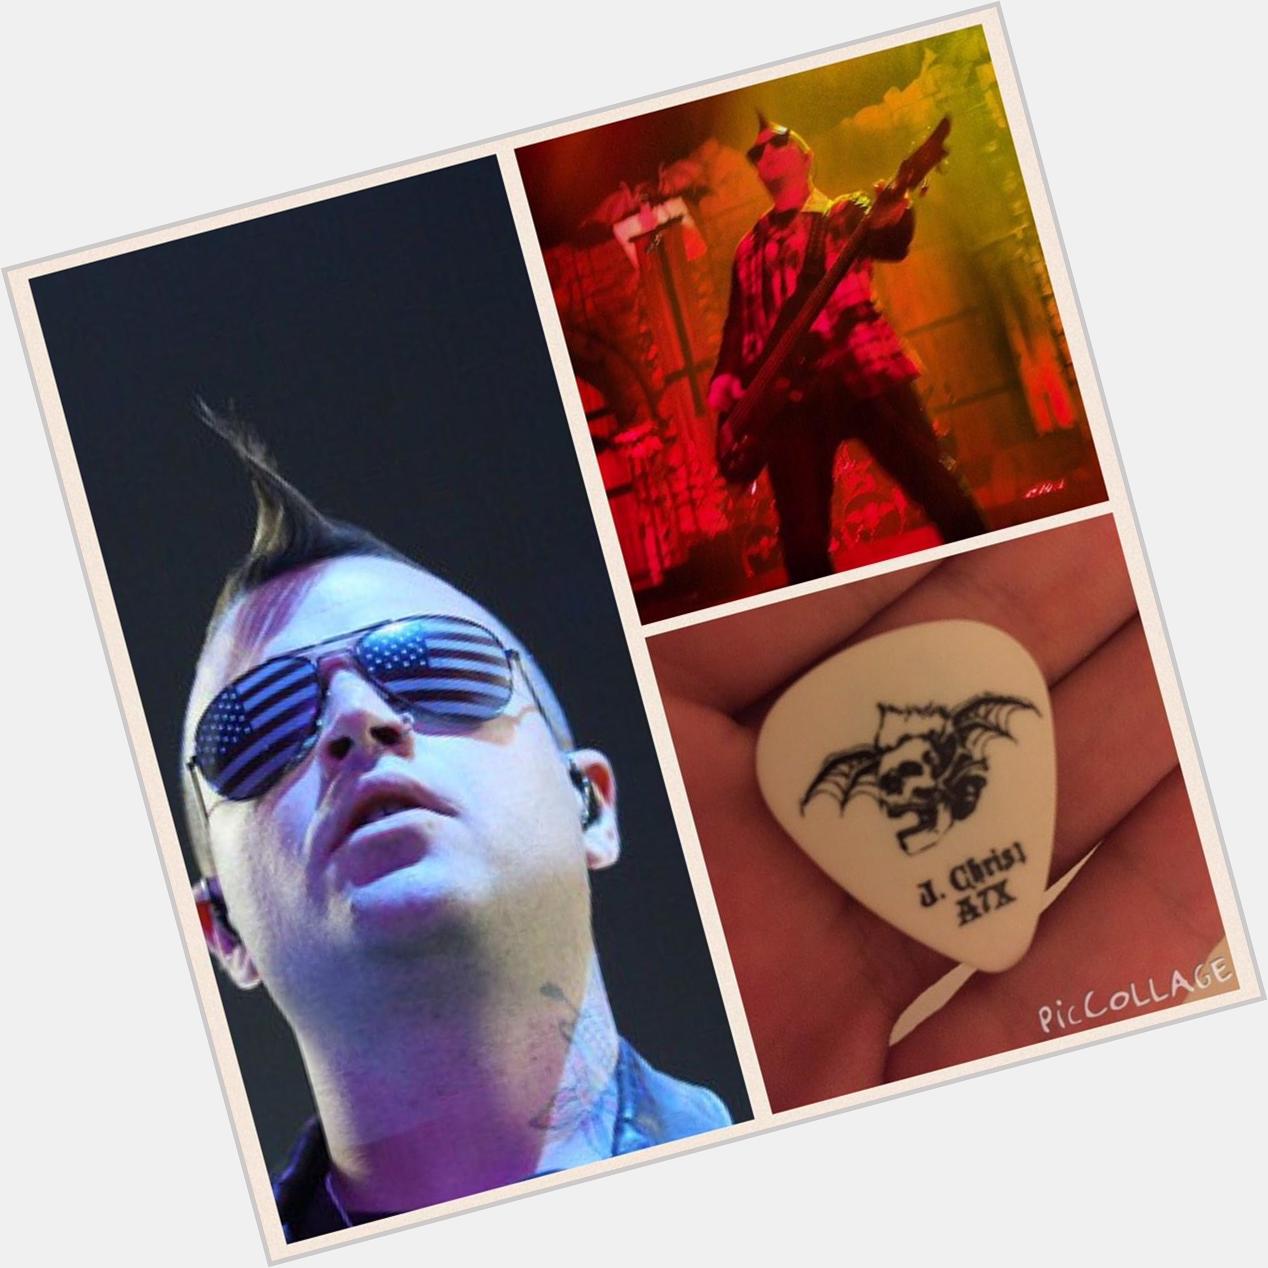 Happy Birthday to one of the best bassists out there Johnny Christ  